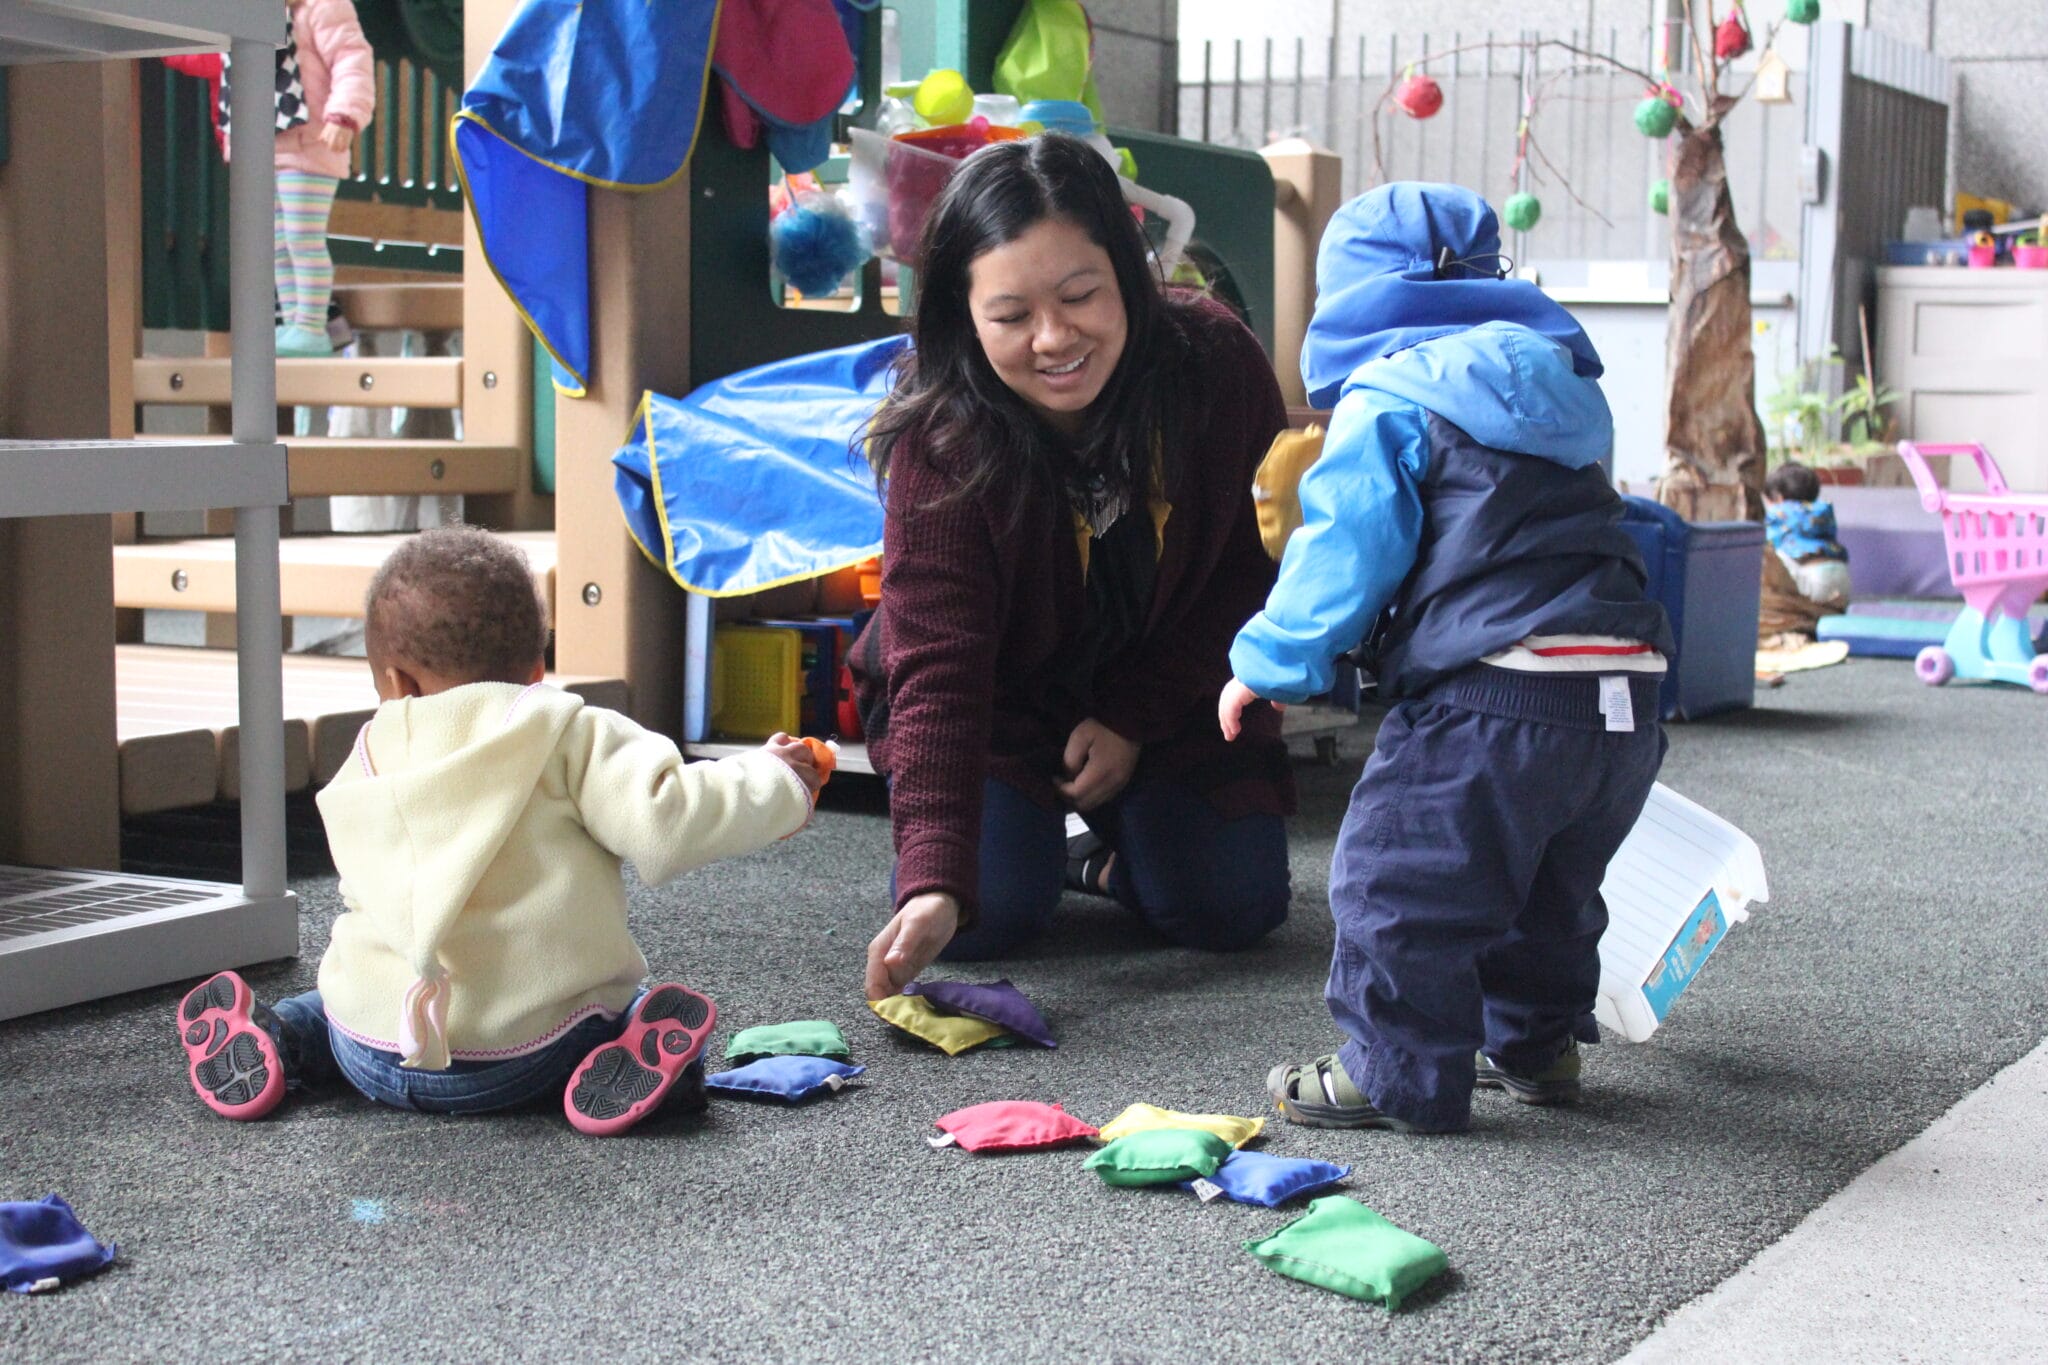 A child caretaker playing with two children.